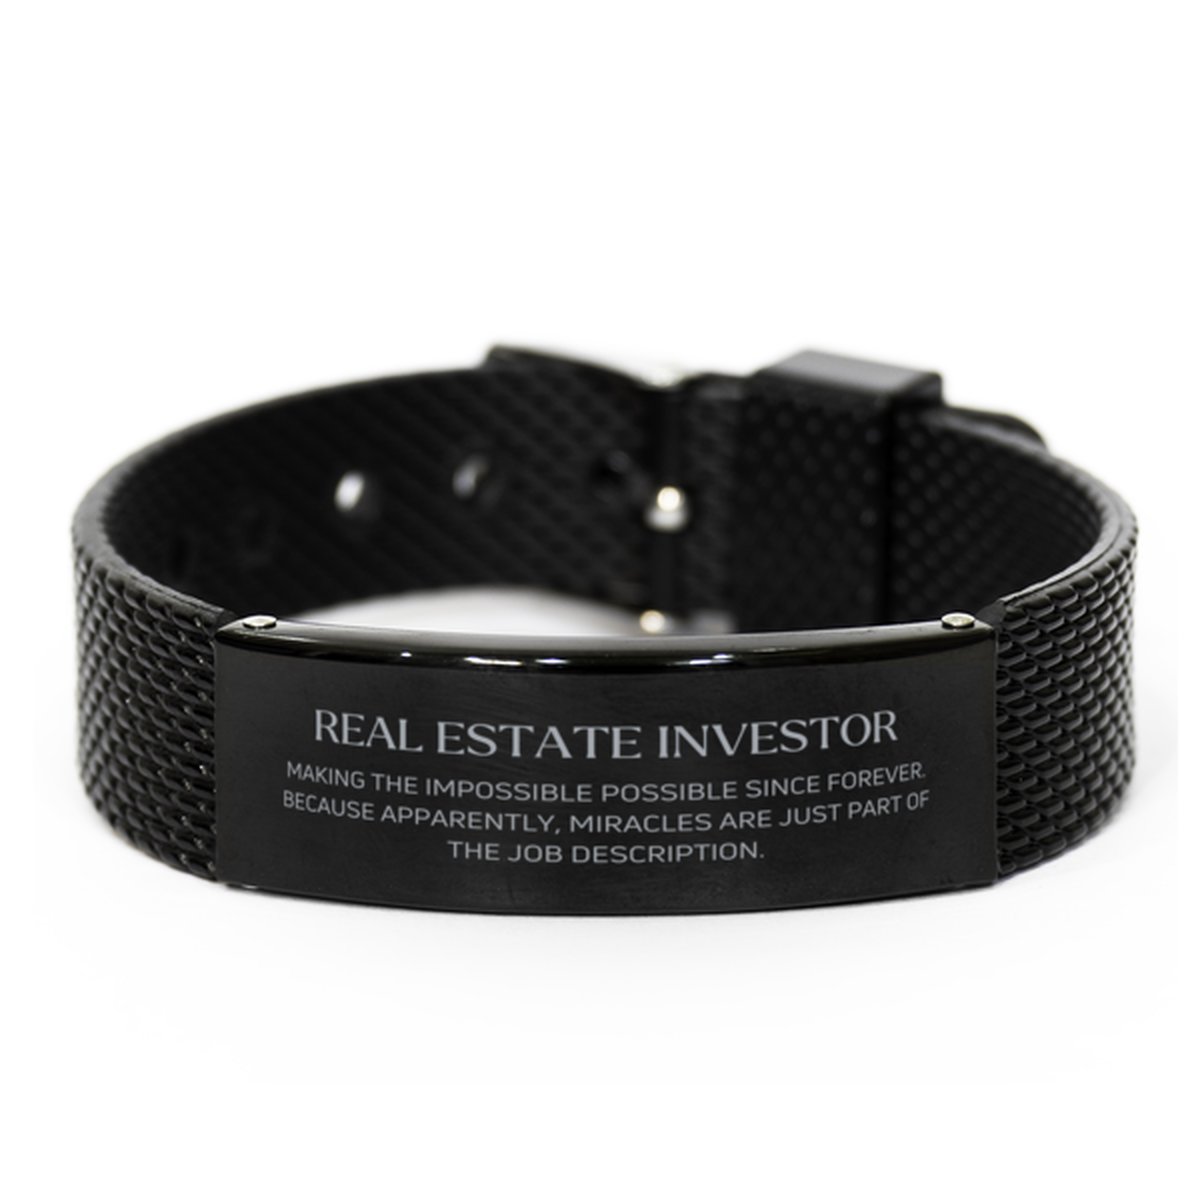 Funny Real Estate Investor Gifts, Miracles are just part of the job description, Inspirational Birthday Black Shark Mesh Bracelet For Real Estate Investor, Men, Women, Coworkers, Friends, Boss